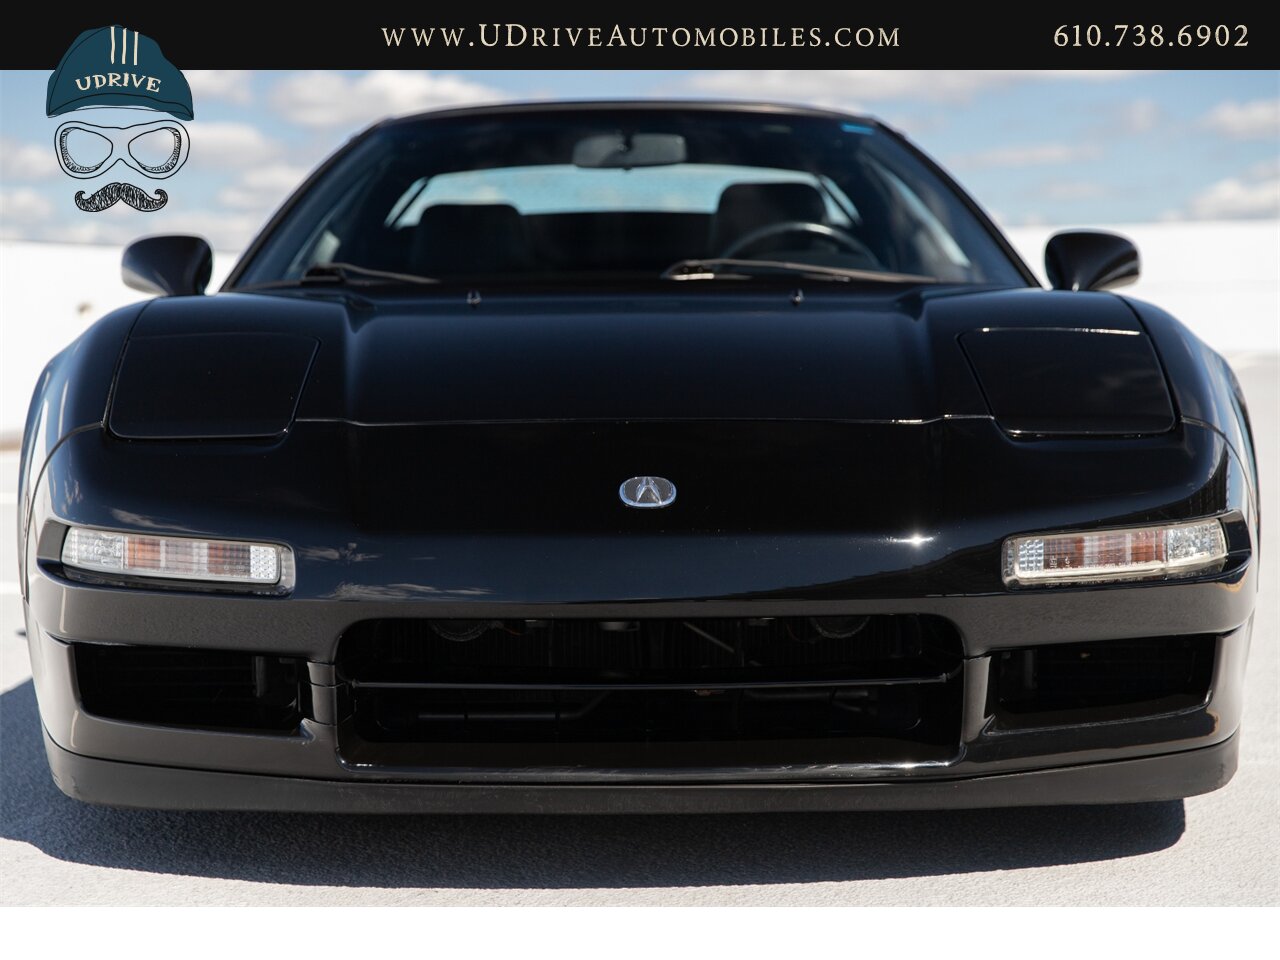 1996 Acura NSX NSX-T  5 Speed Manual Fresh Timing Belt Service - Photo 15 - West Chester, PA 19382